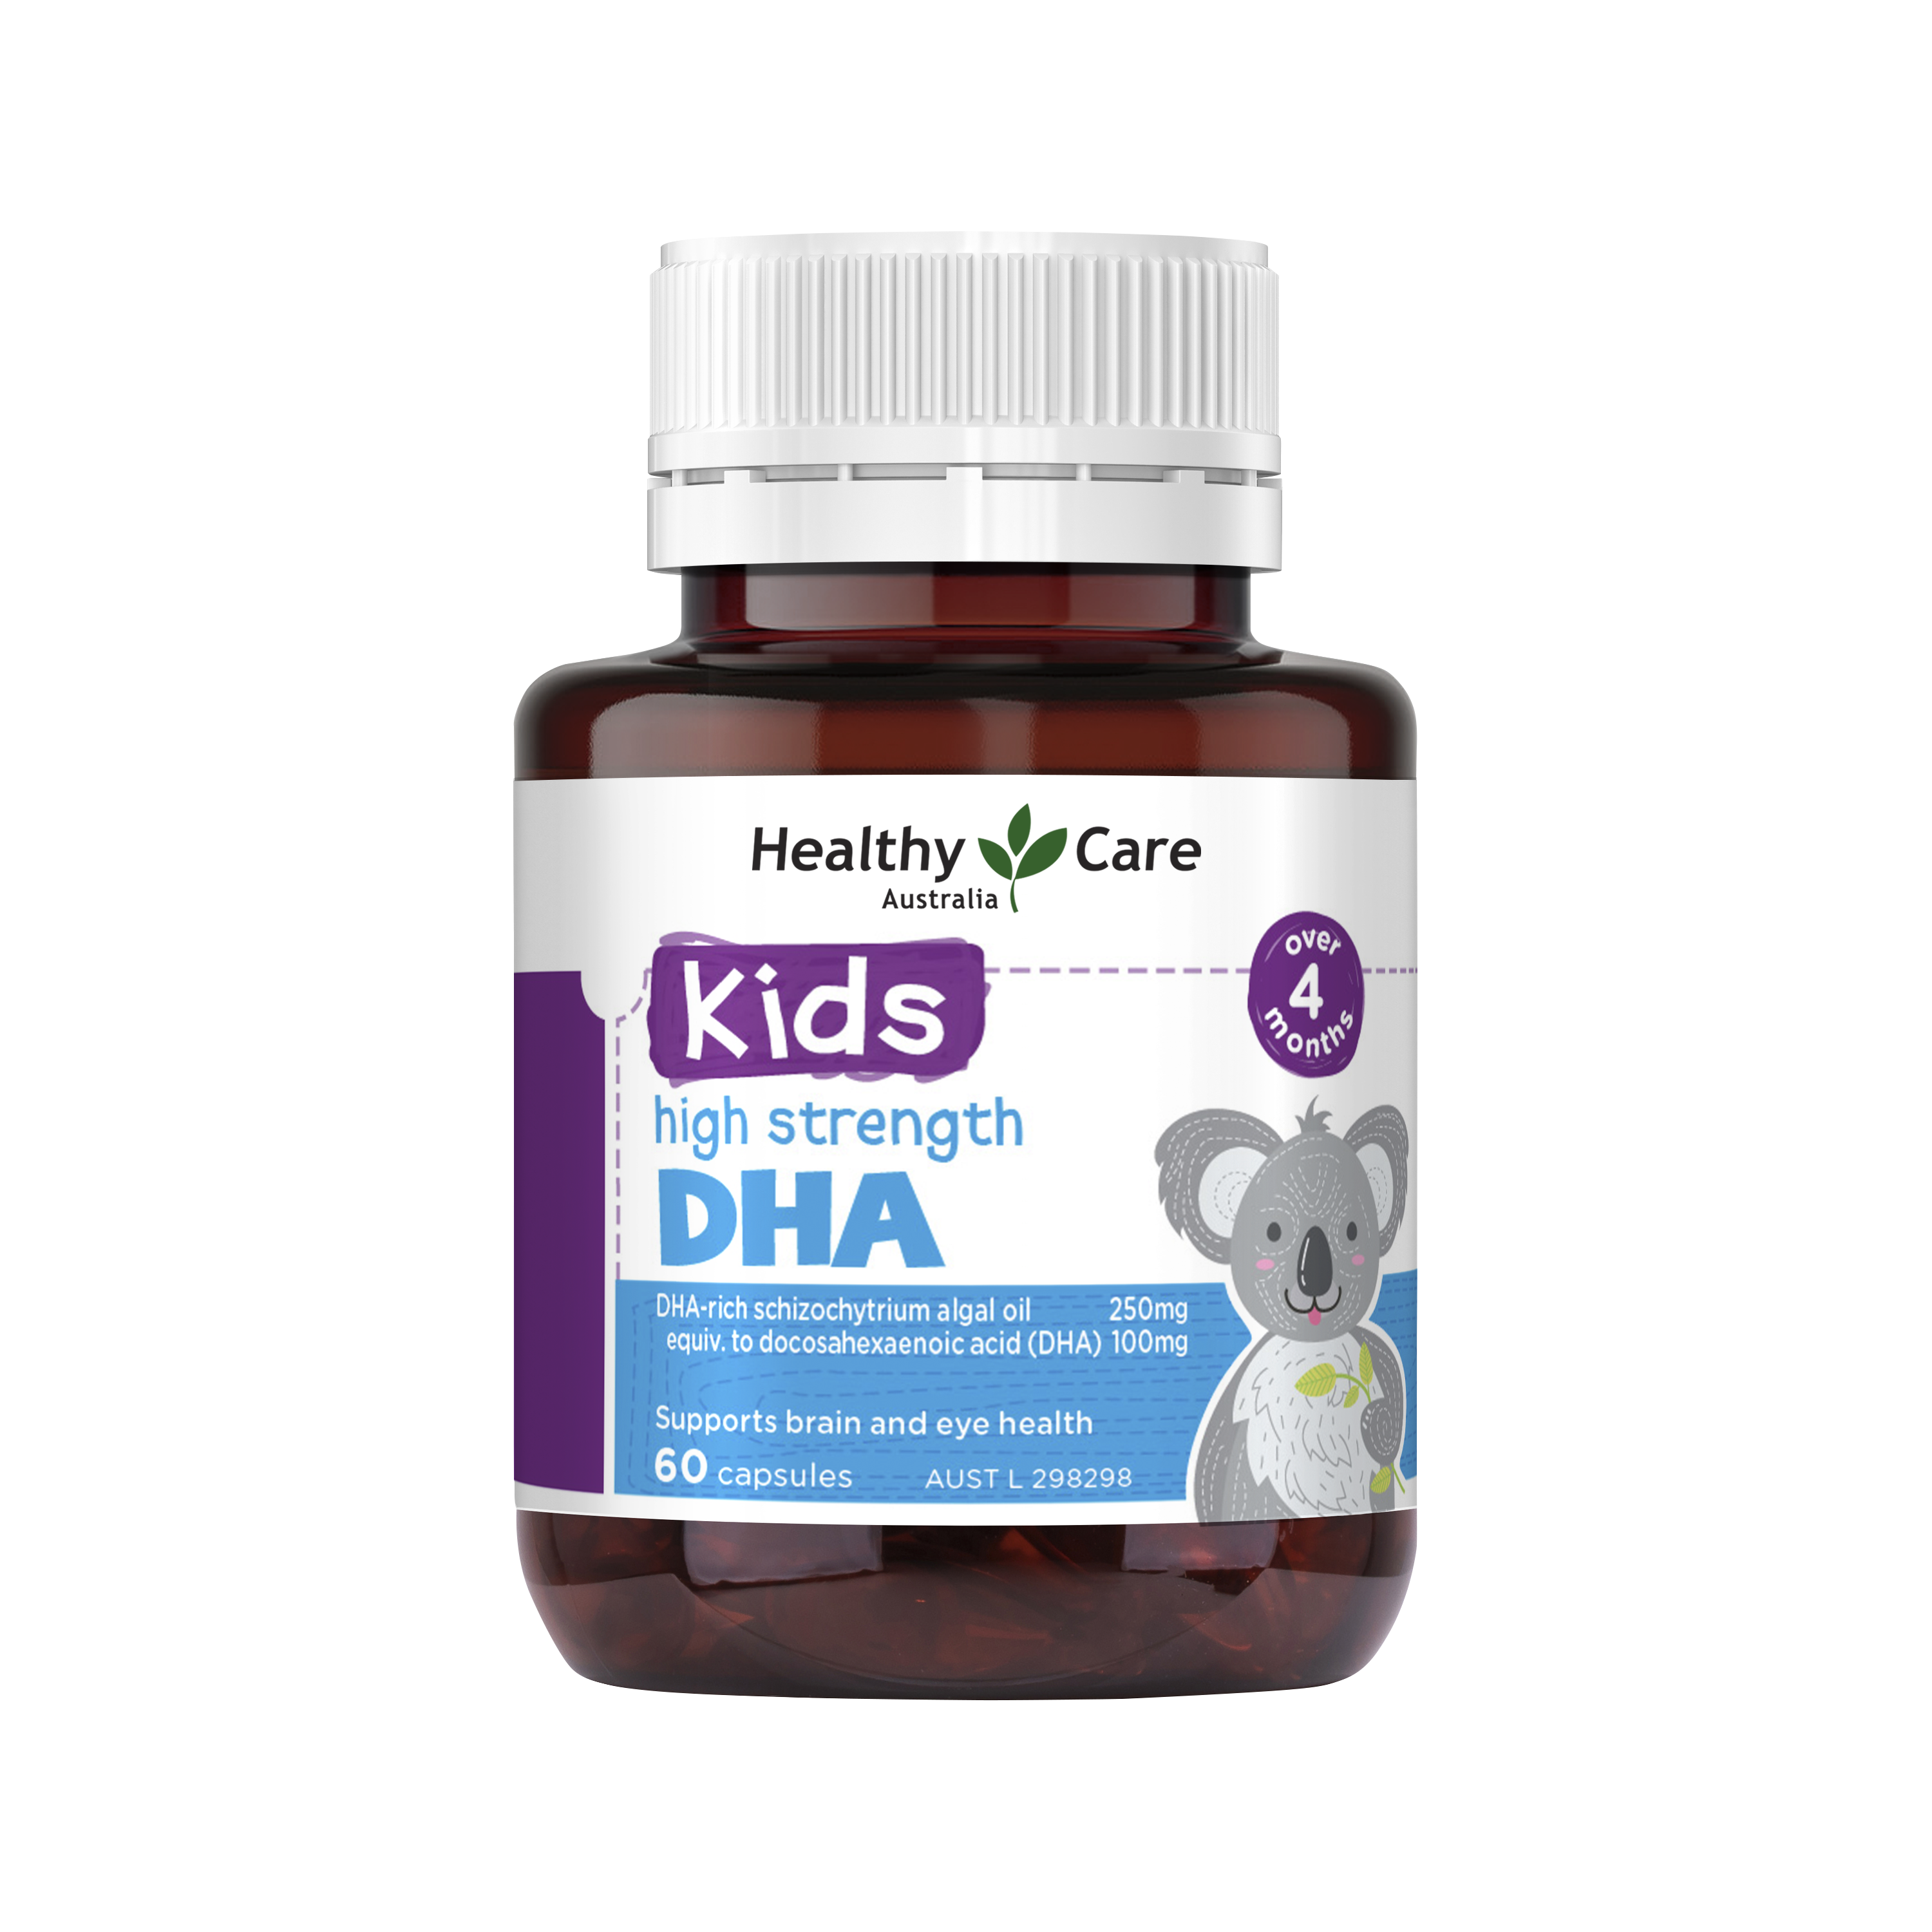 Healthy Care Kids High Strength DHA - 60 Capsules